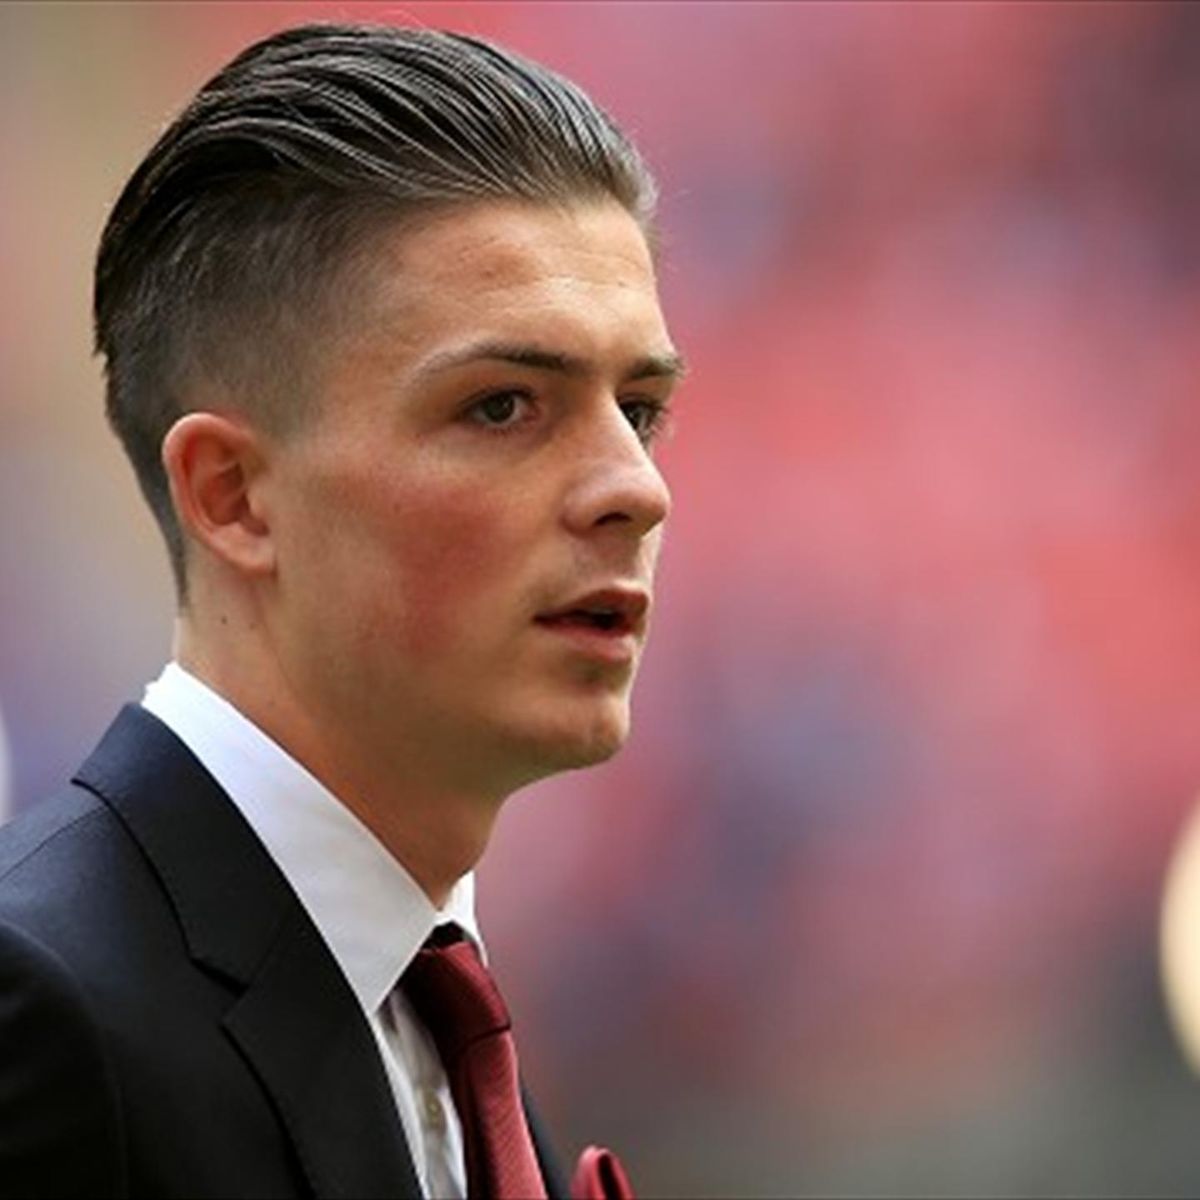 Its curtains for short hair as Jack Grealish resurrects centre parting   Fashion  The Guardian